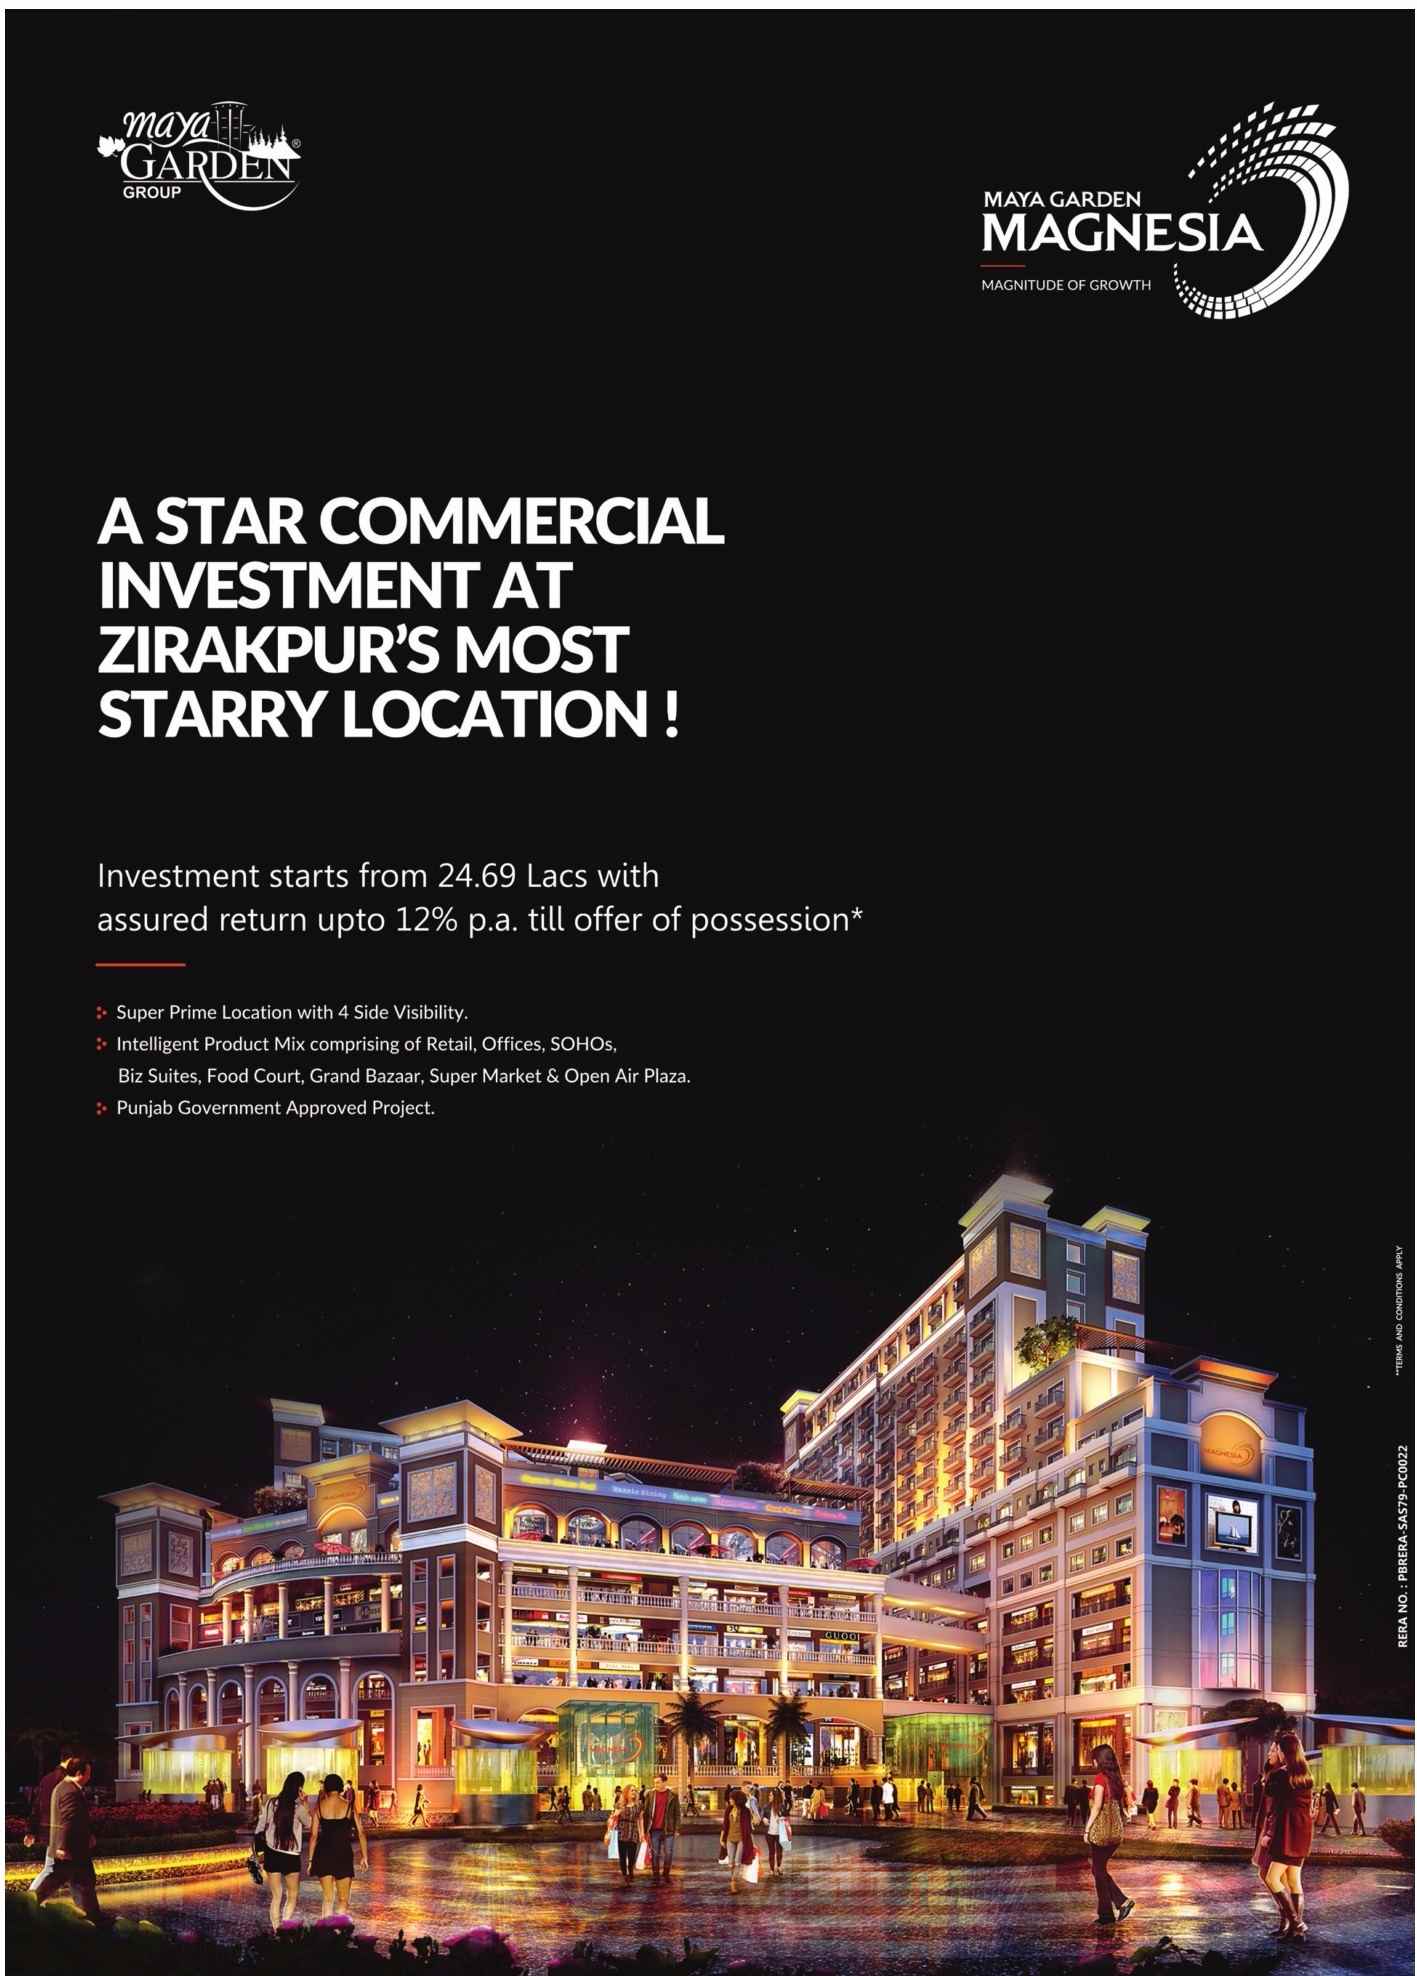 Maya Garden Magnesia - A star commercial investment at Zirakpur's most starry location Update